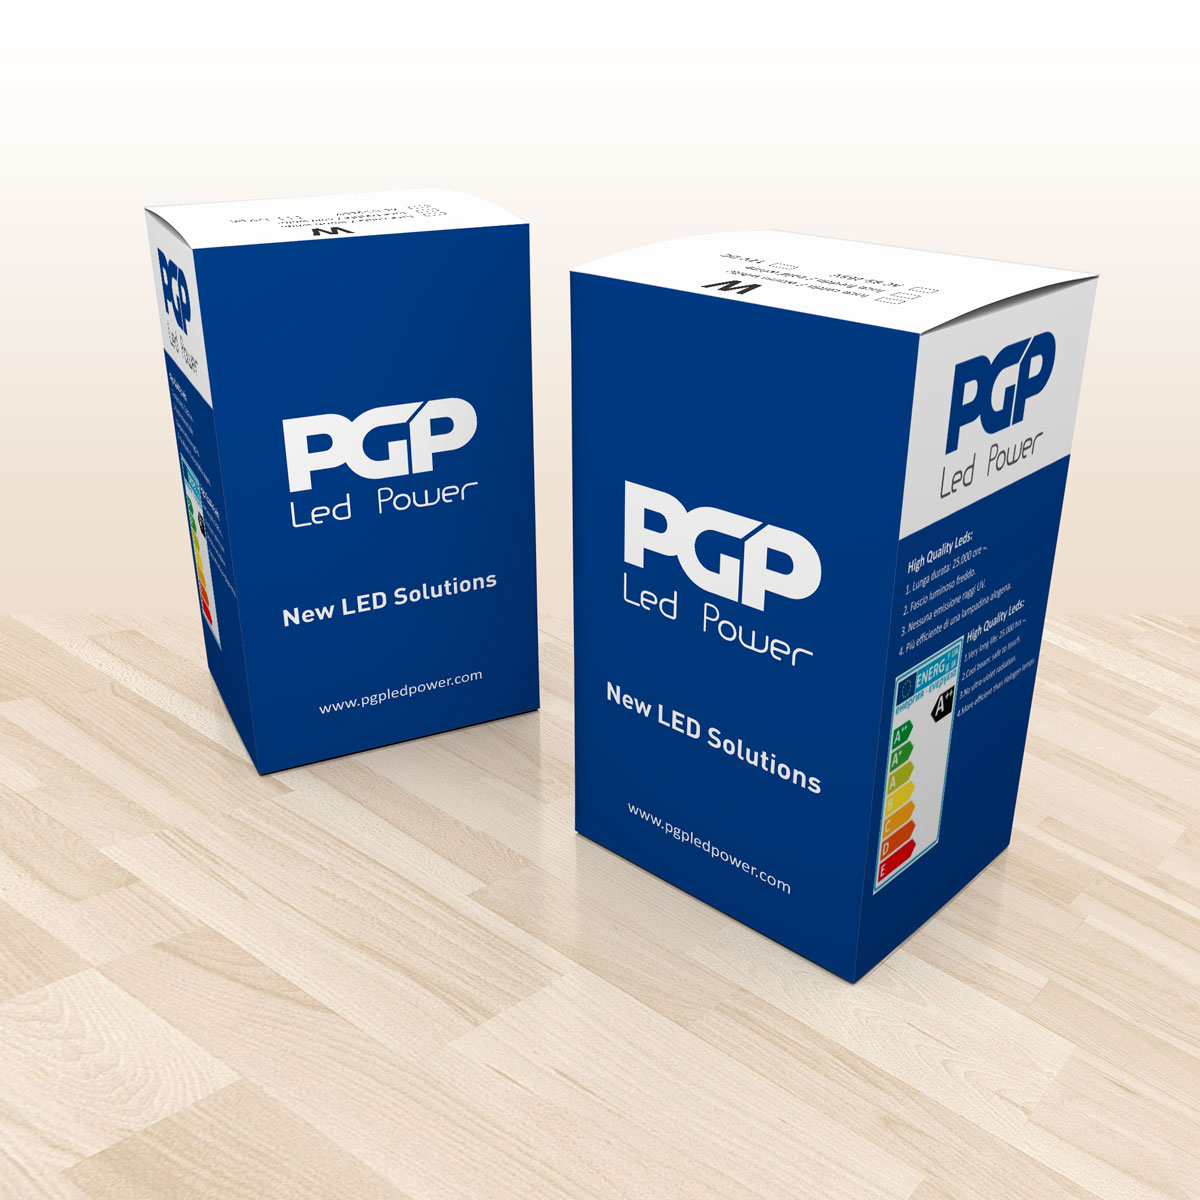 PGP Led Power Packaging by Maniac Studio